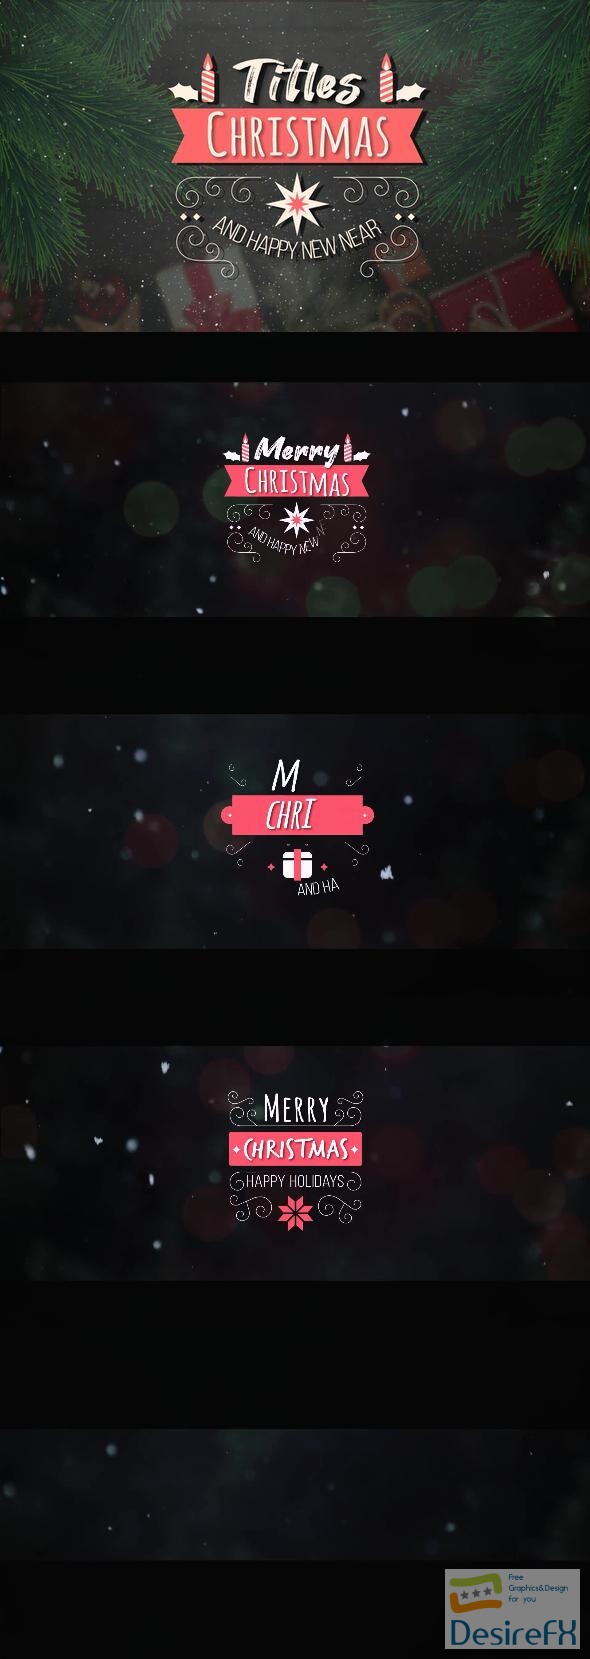 VideoHive Christmas Titles 48666277